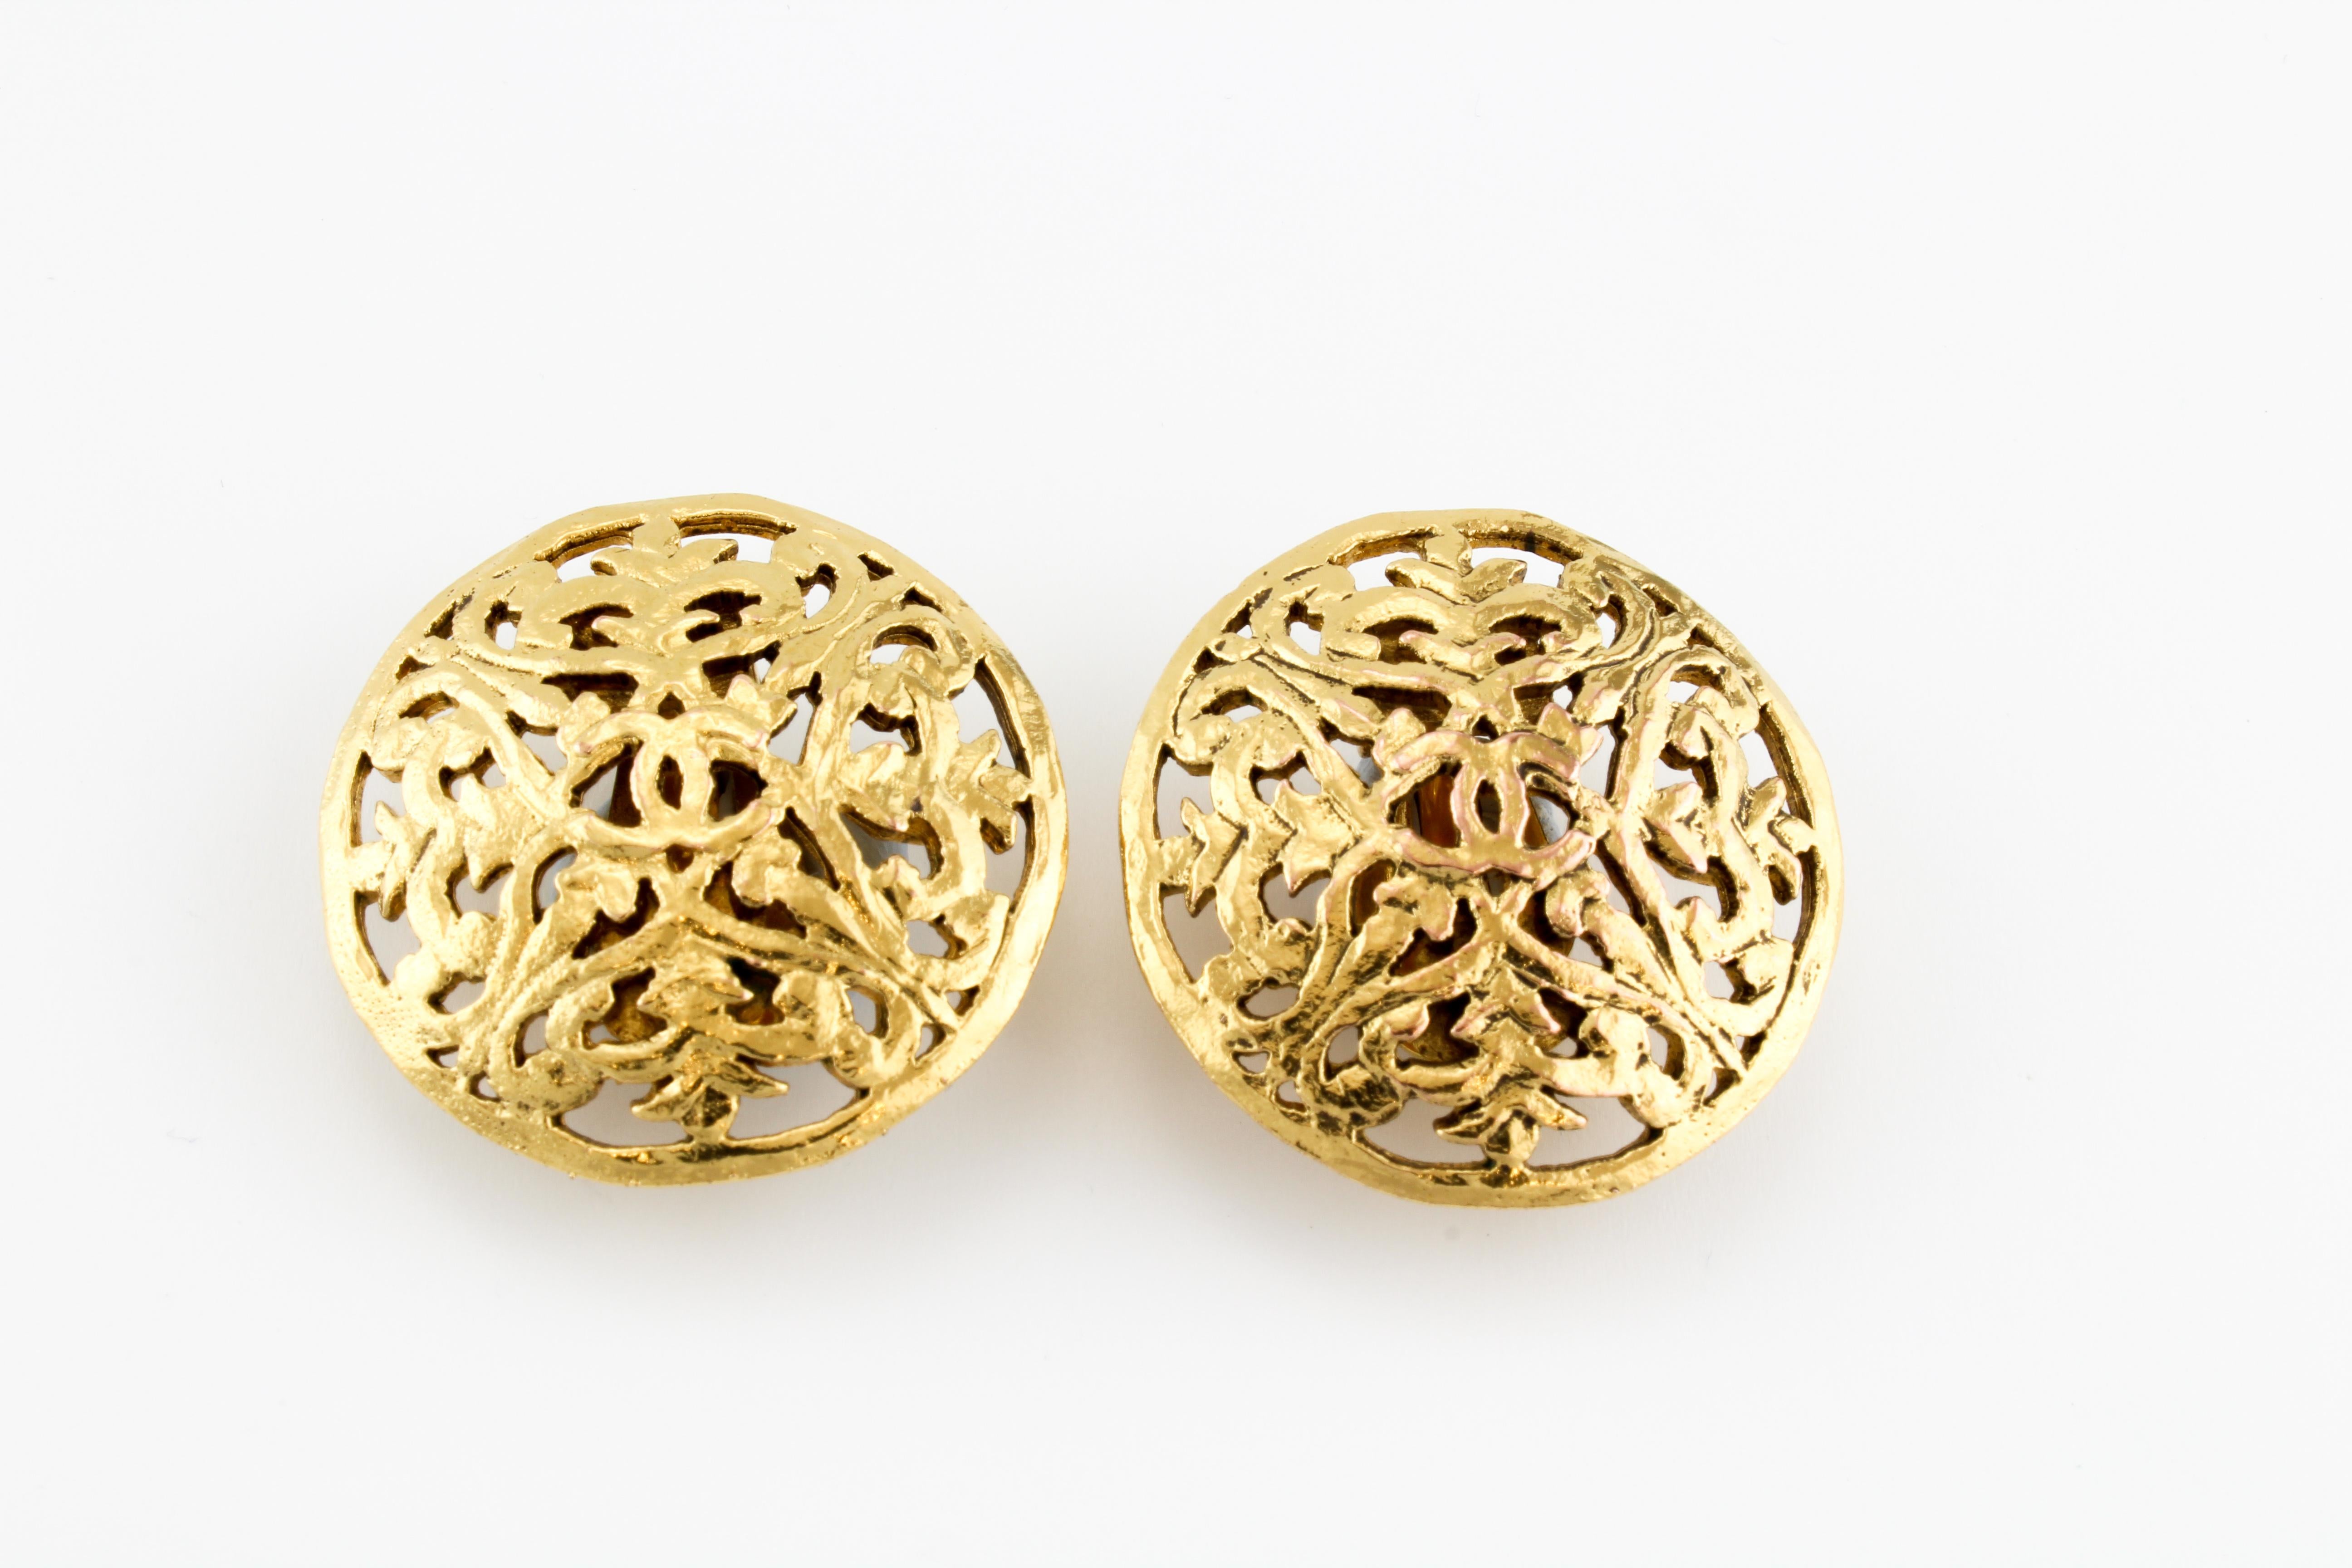 Chanel vintage 1986 filigree clip on earrings. Features the signature CC logo in the centre of each earring. 

Features the classic 80s cartouche denoting the collection number 25 from 1986. This dating system was used by Chanel from 1984-1989. It